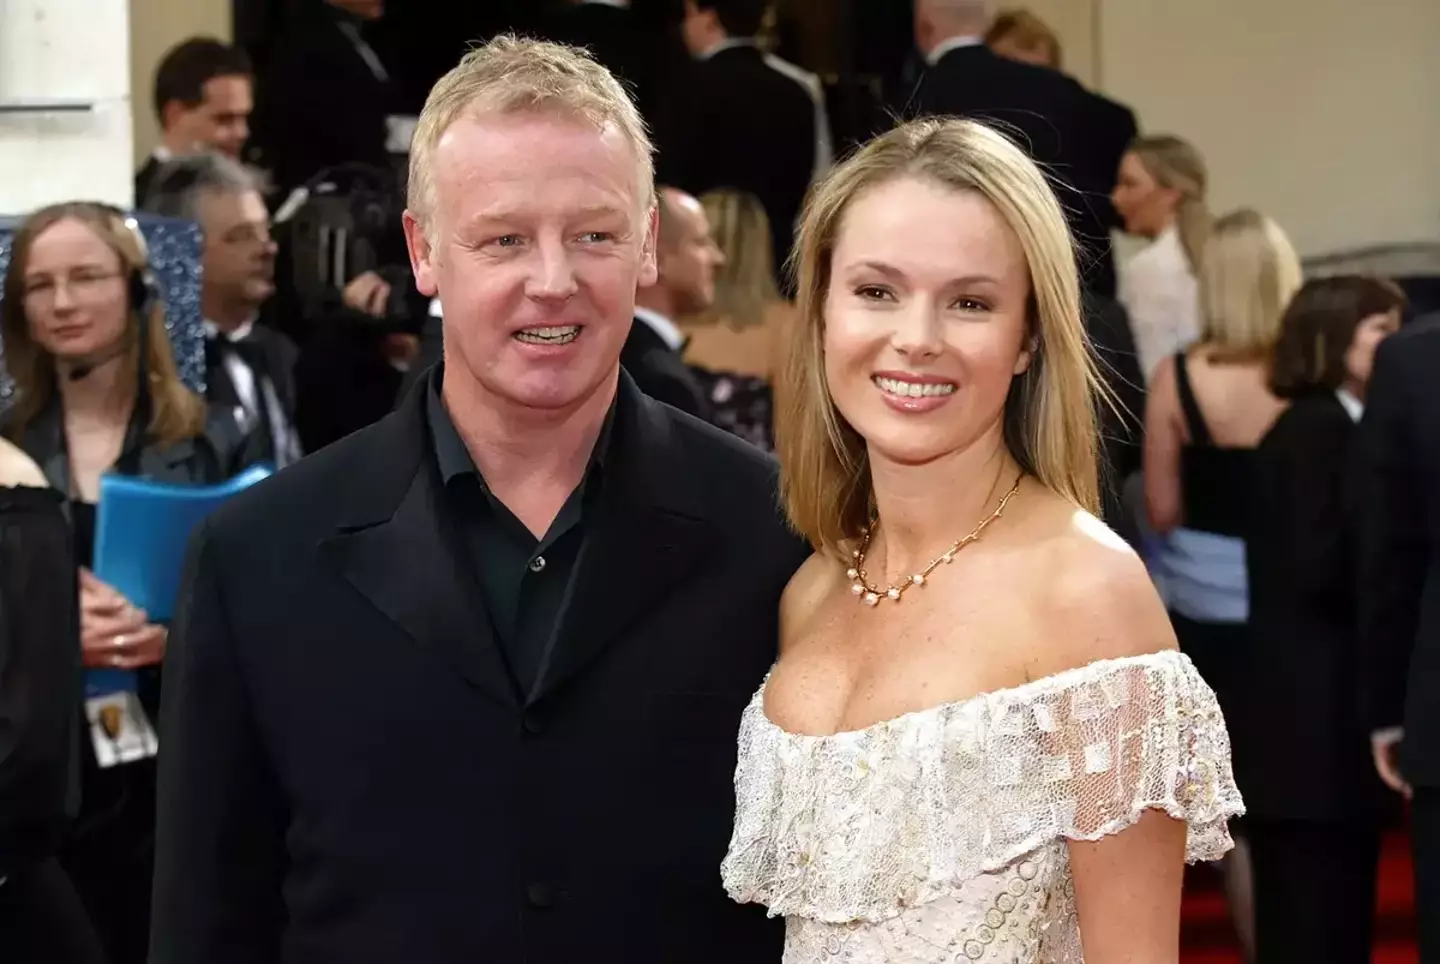 Amanda Holden and Les Dennis were married between 1995 and 2003.